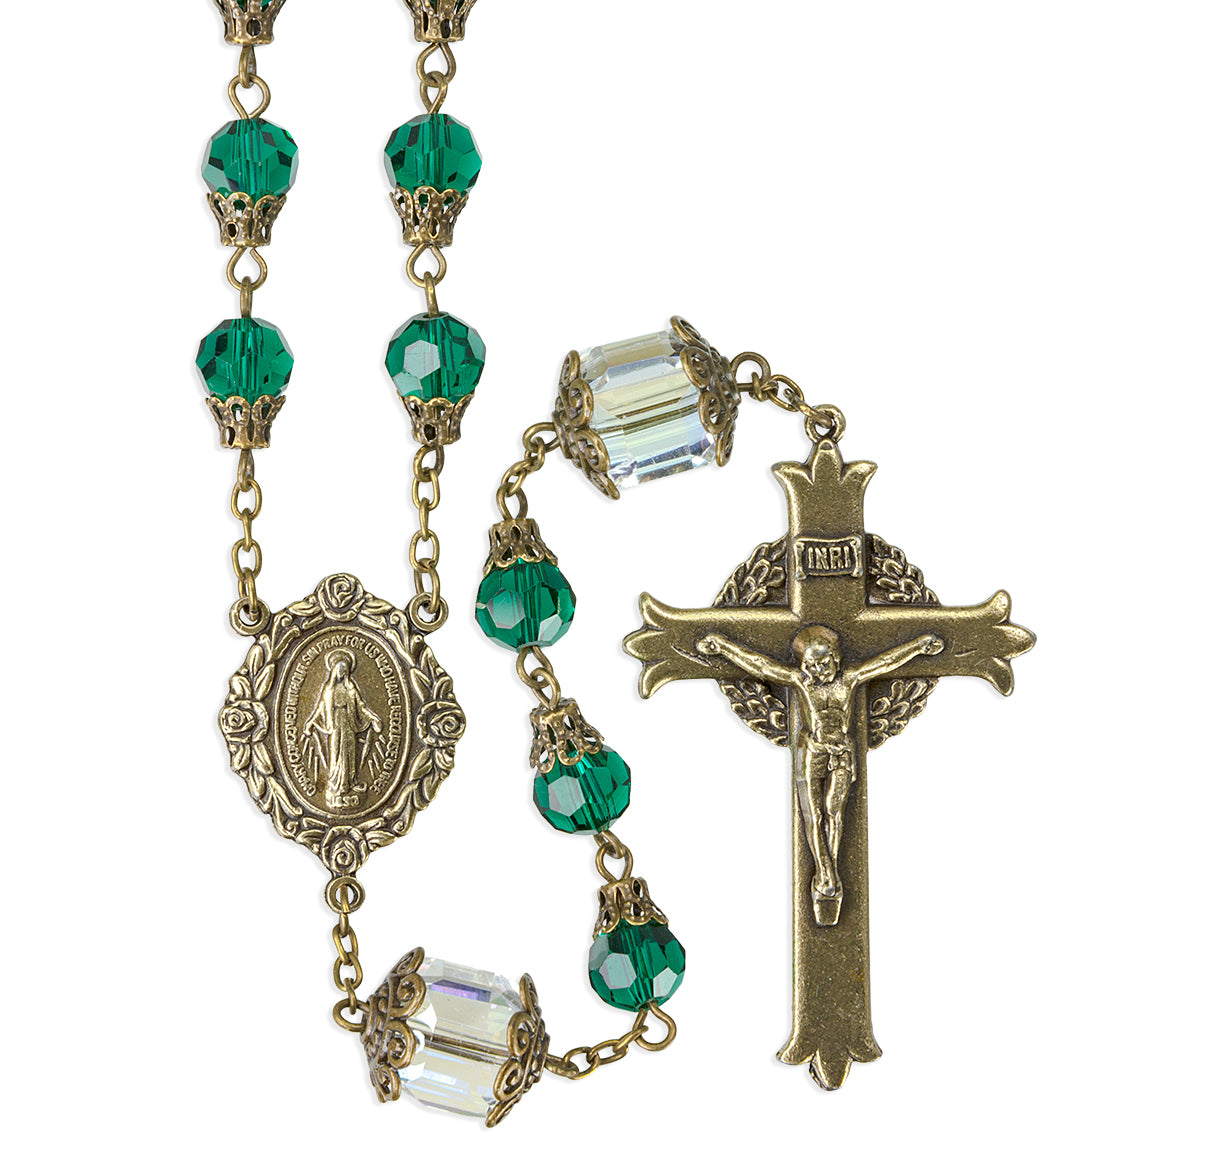 8mm Emerald Green Faceted Glass Beads with Antique Brass Bend Caps Crucifix and Centerpiece